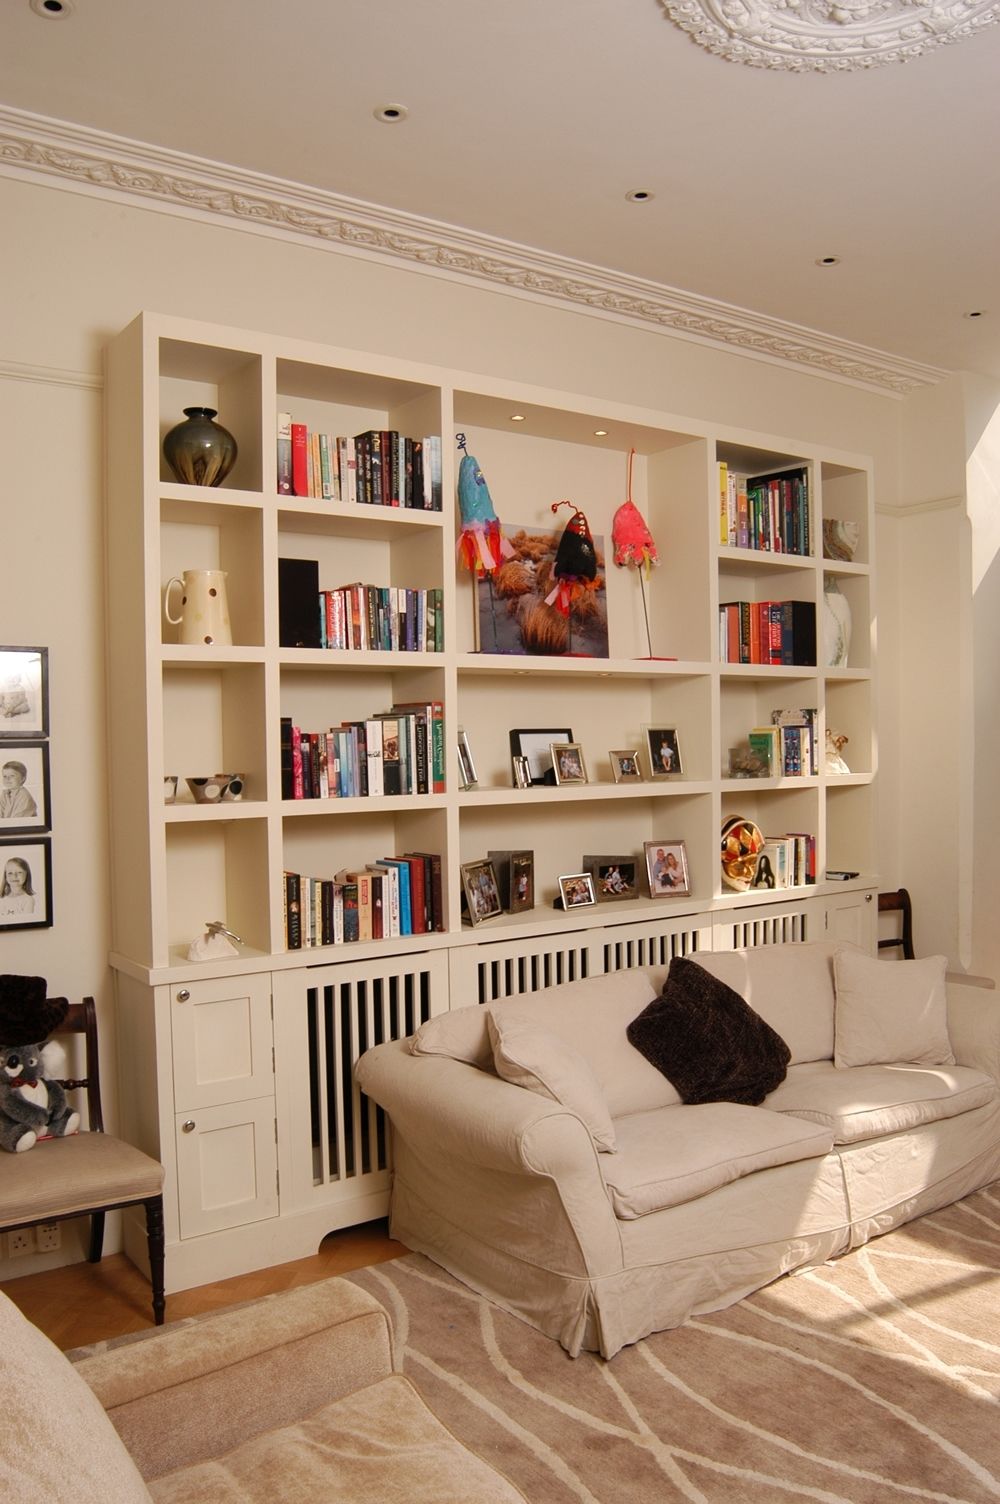 London Alcove Regarding Radiator Cover With Bookcases (View 5 of 15)